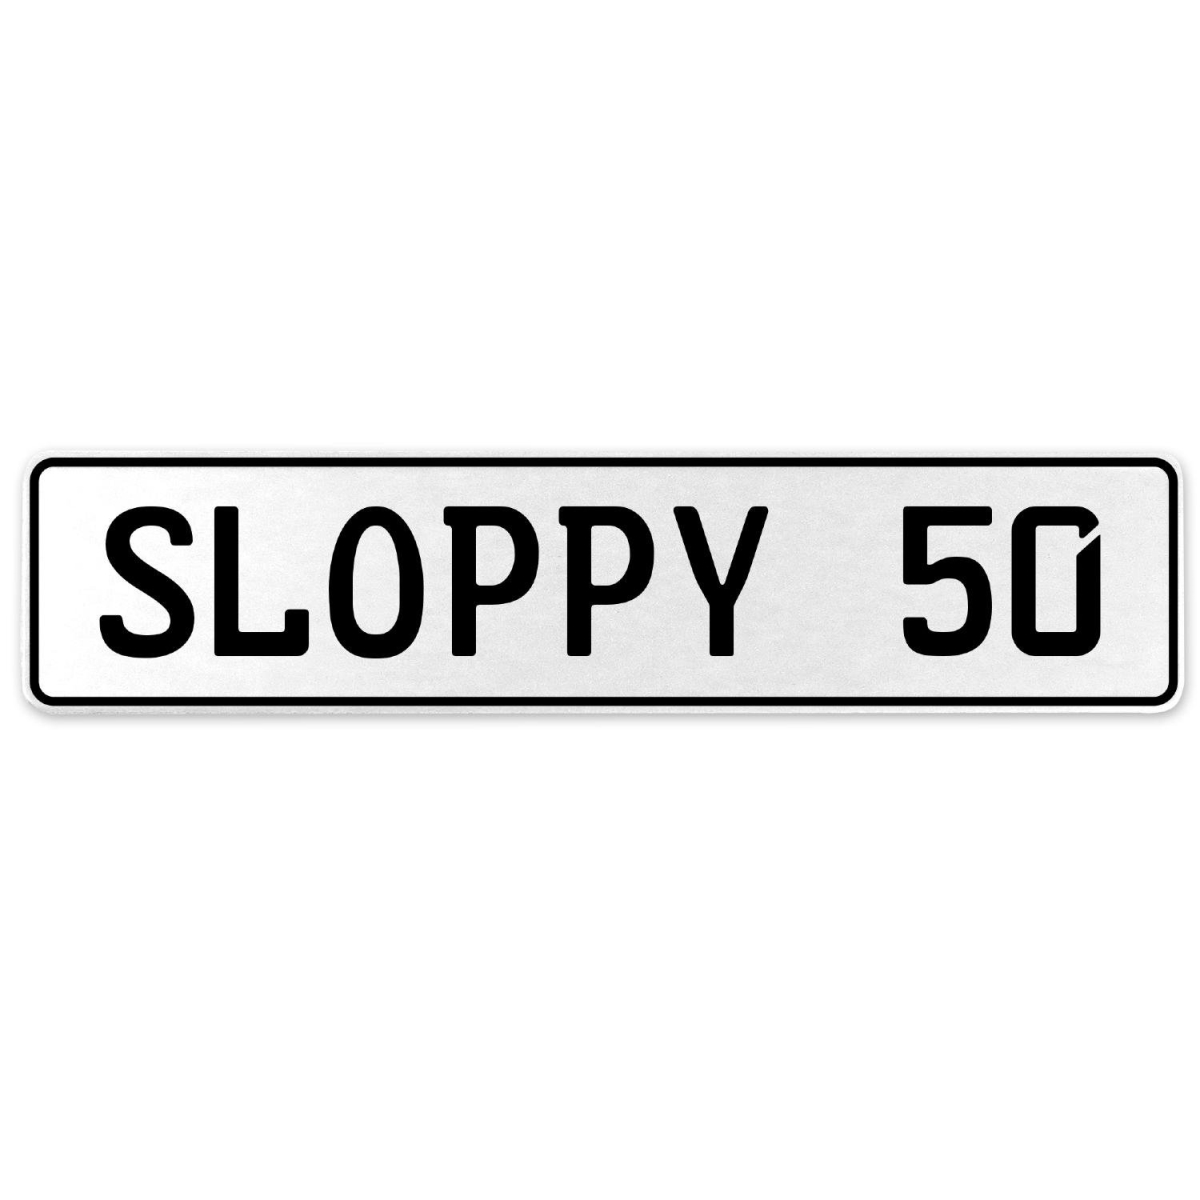 Sloppy 50 - White Aluminum Street Sign Mancave Euro Plate Name Door Sign Wall